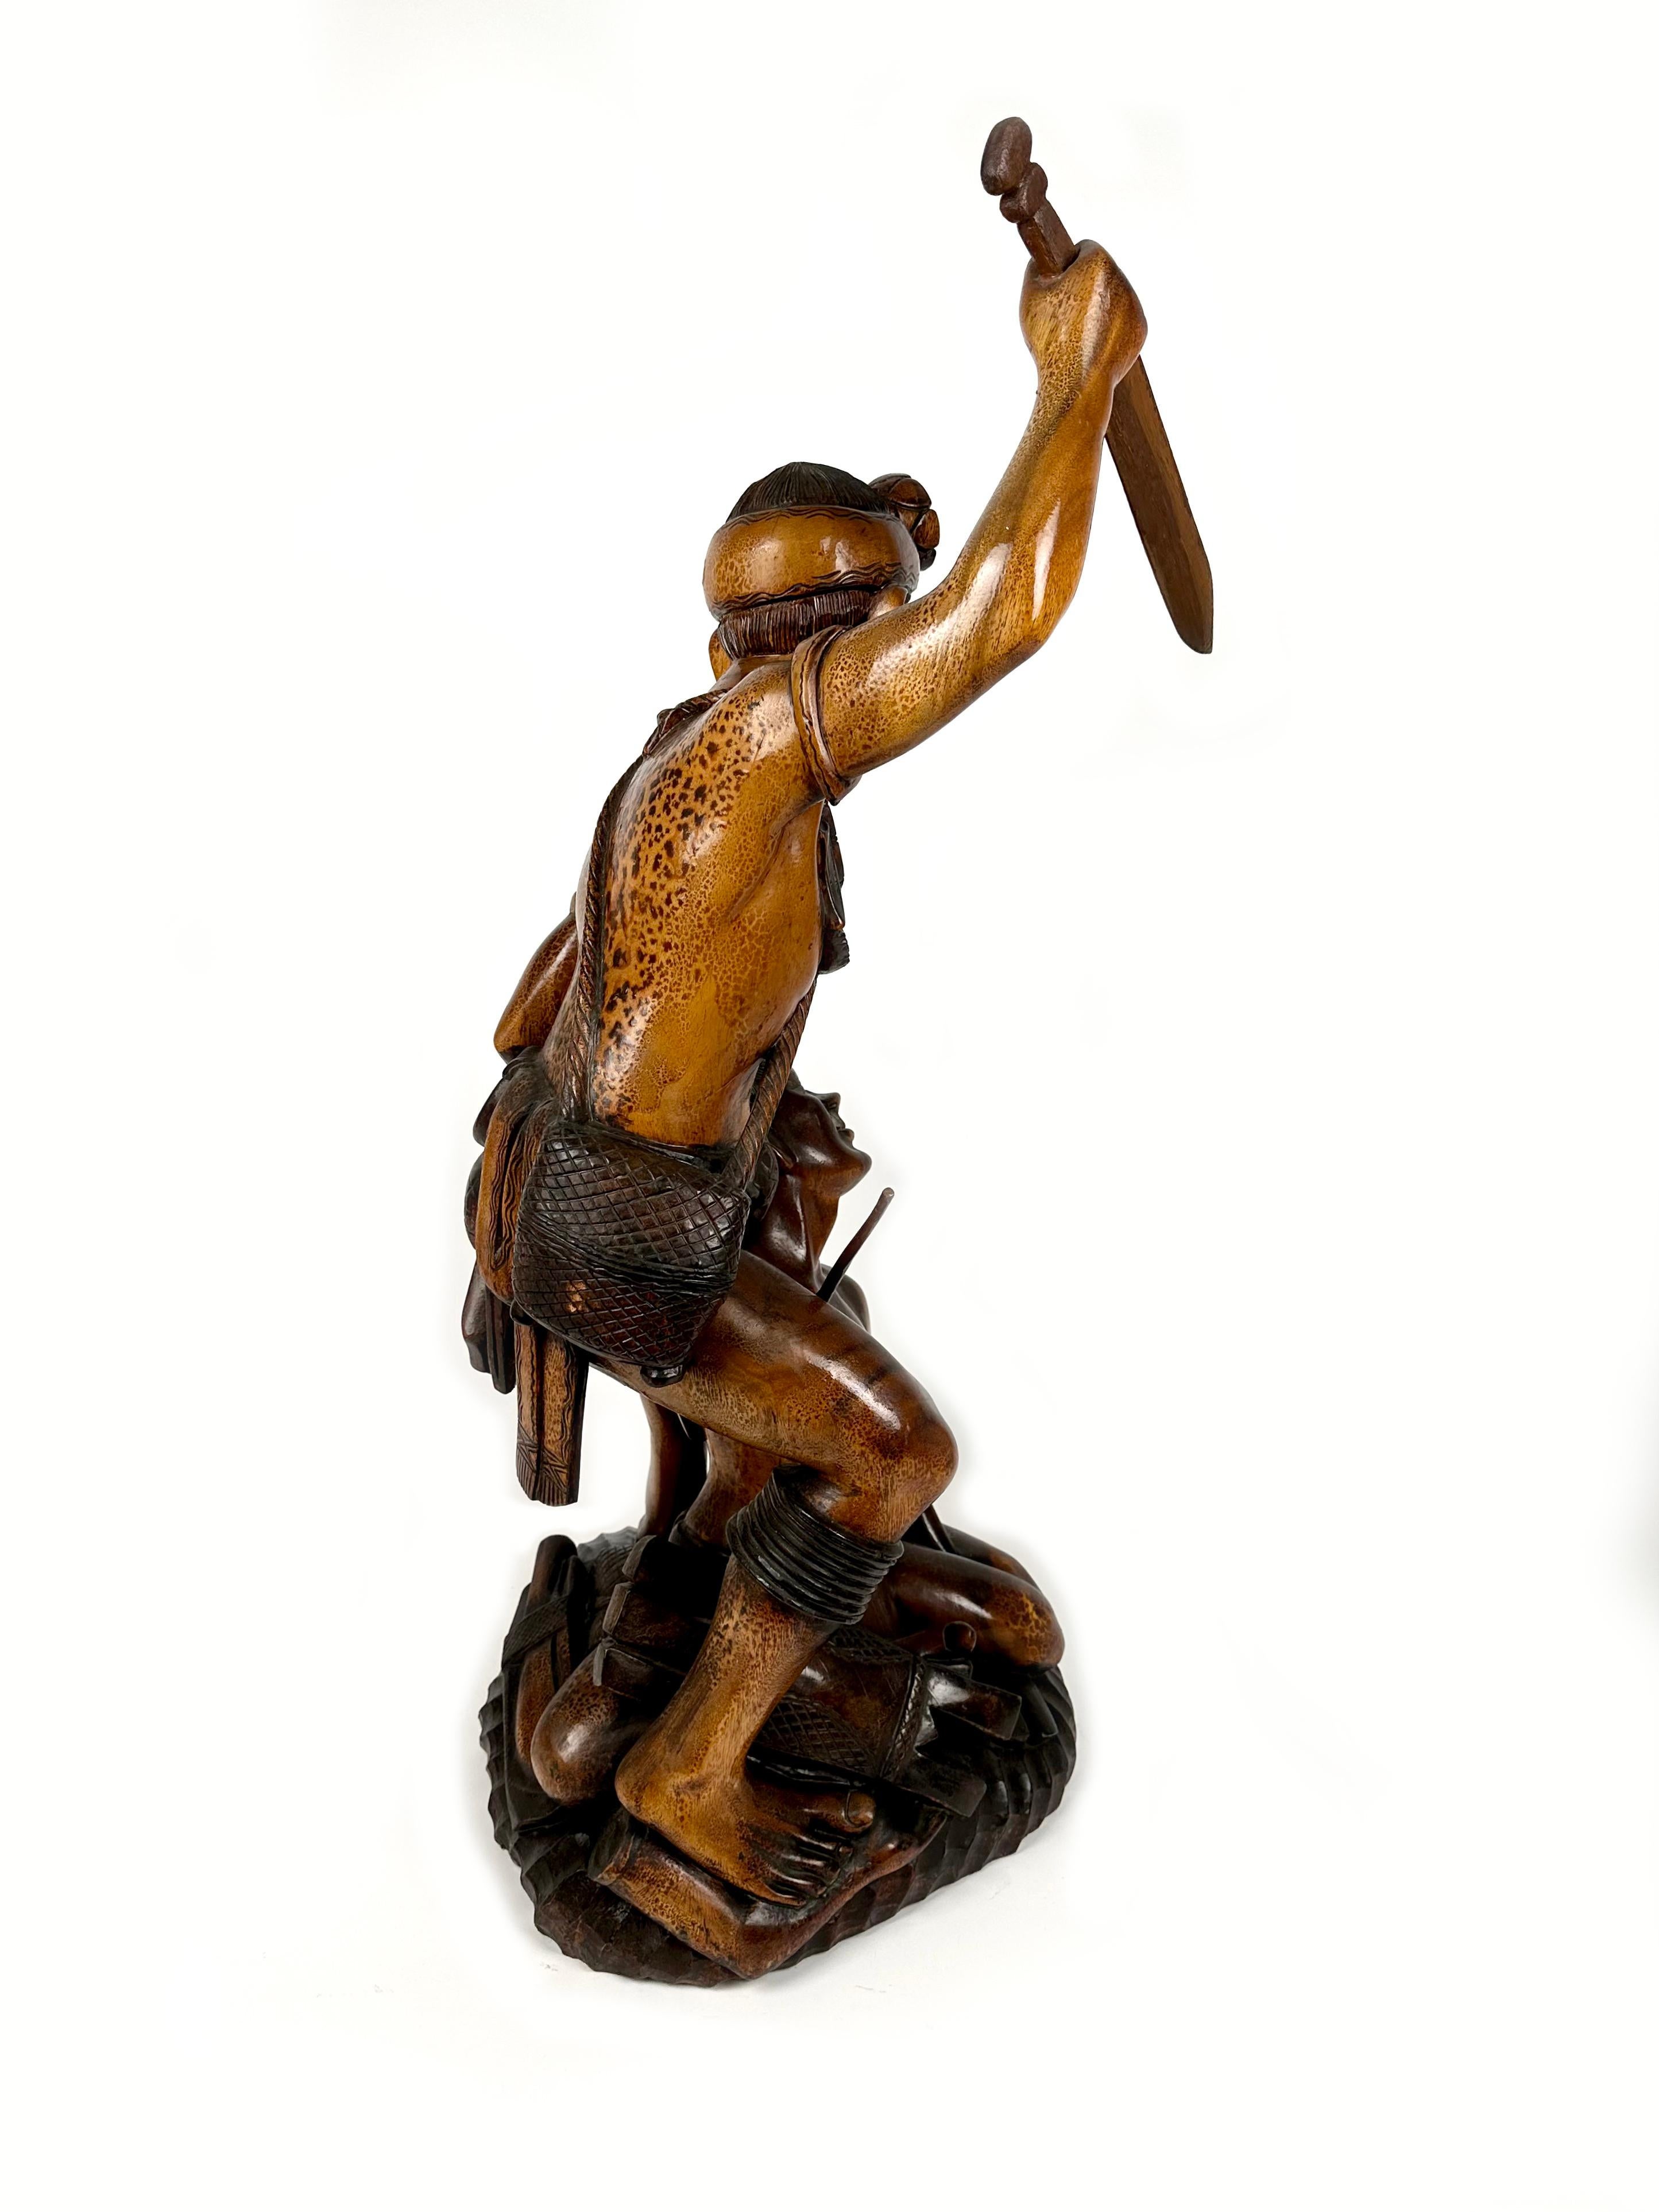 Hand-Carved Igorot Tribesmen Figurative Sculpture in Carved Wood, Philippine, 1950s For Sale